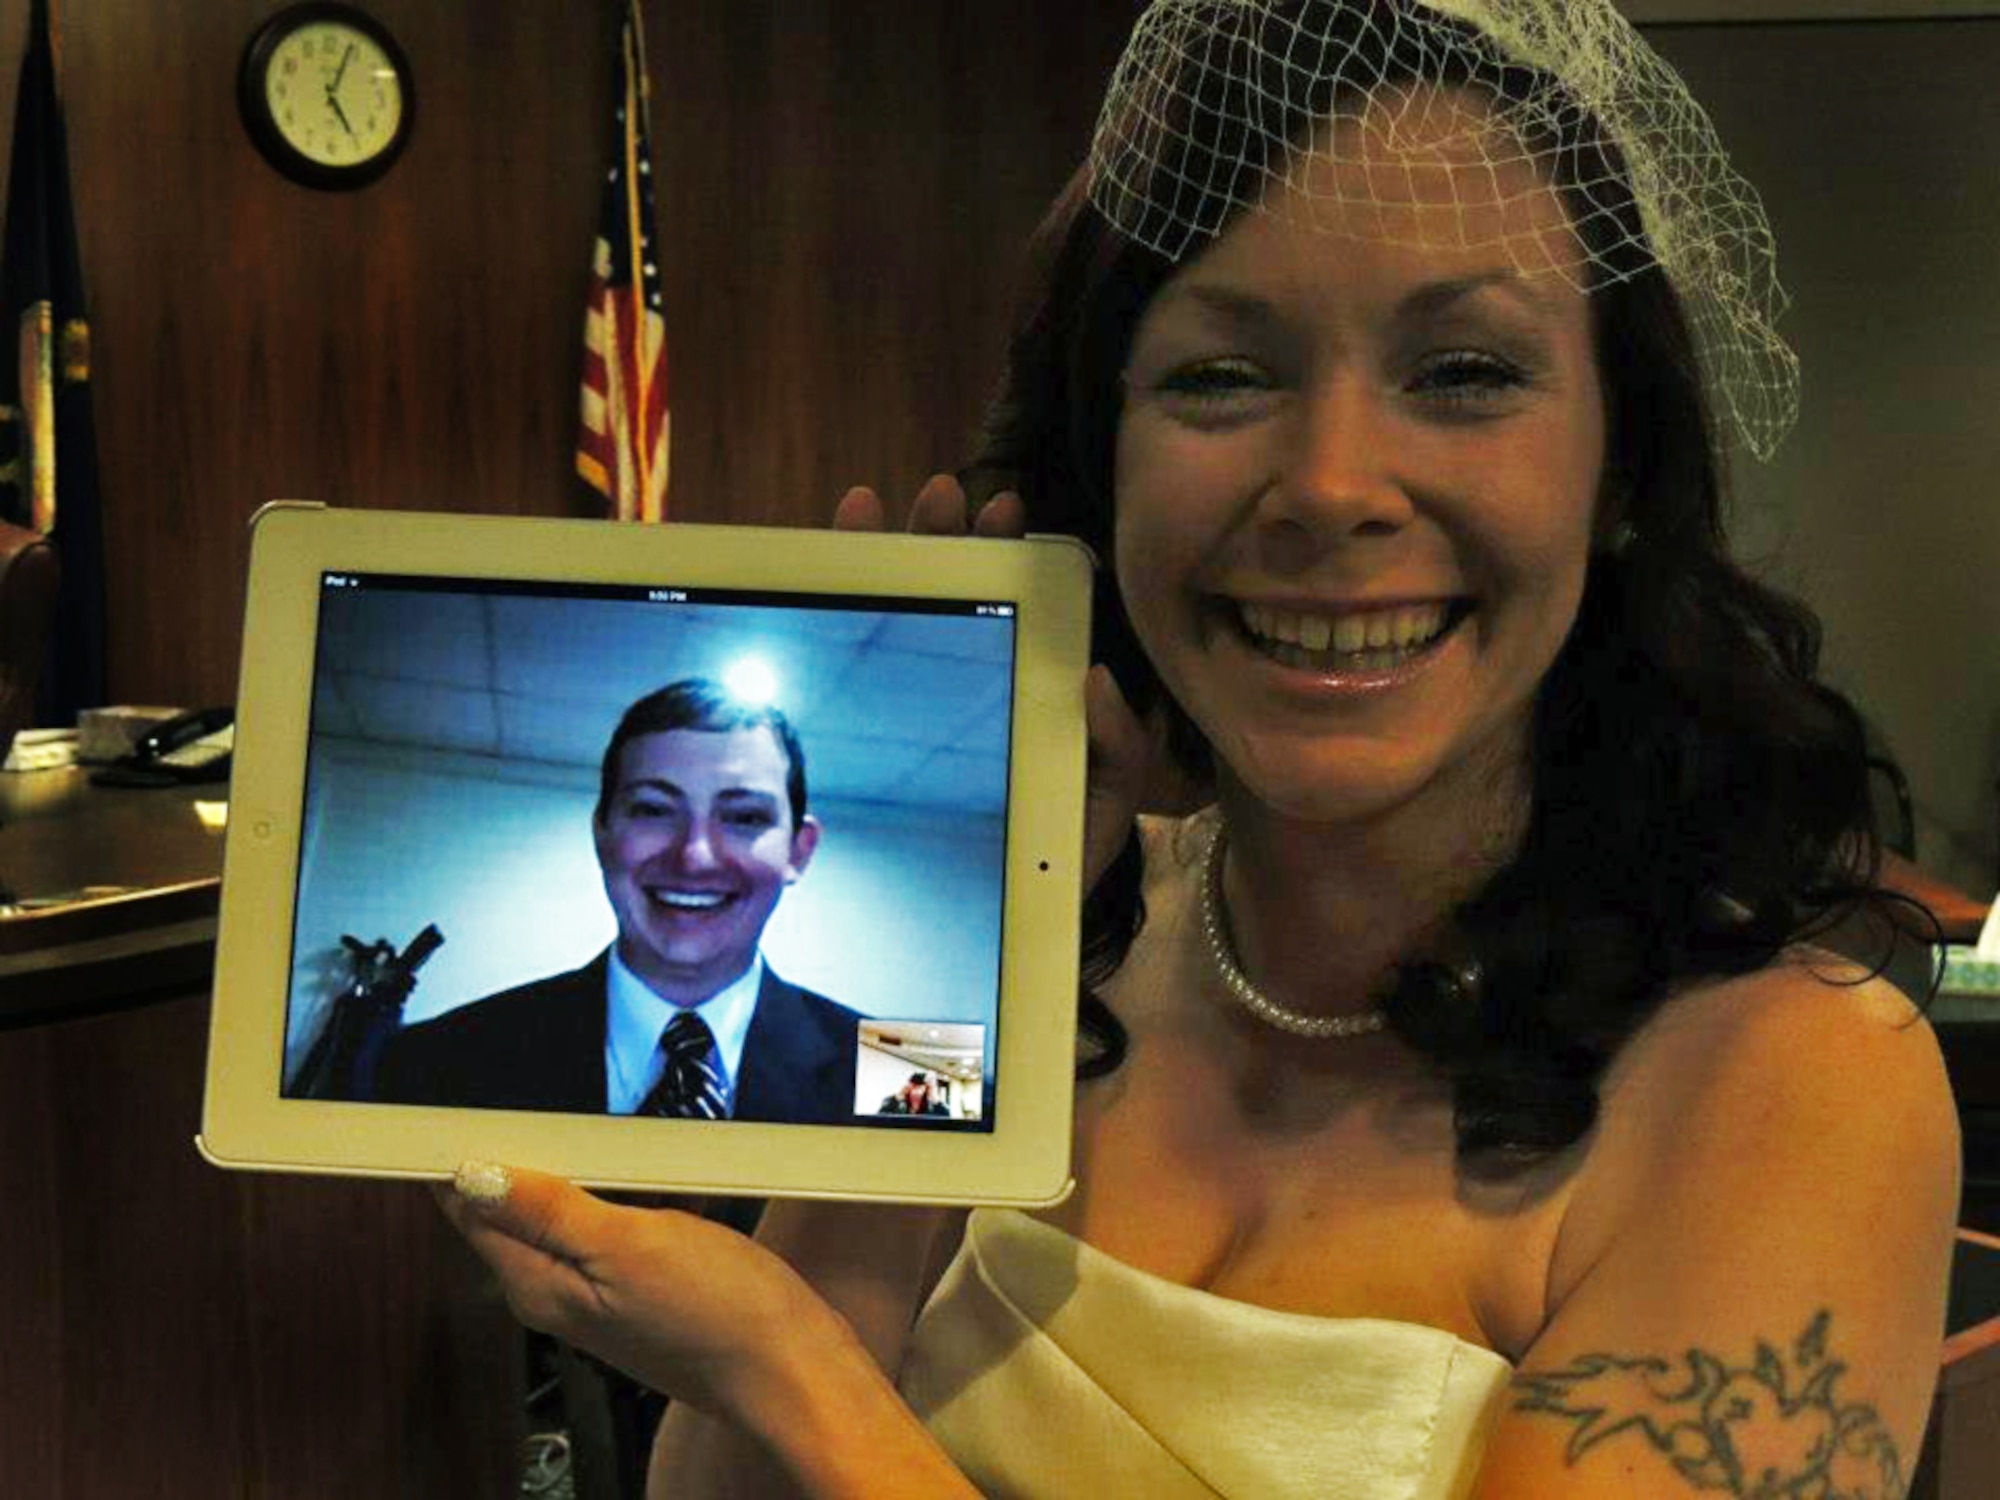 Kari Phelps, spouse of Senior Airman Daniel Phelps, 39th Air Base Wing Public Affairs photojournalist, holds a digital screen of her husband during their online wedding ceremony Oct. 29, 2012, at the Johnson County courthouse in Olathe, Kan. Airman Phelps was unable to attend the actual ceremony, due to being stationed at Turkey, so the couple connected virtually for their special day. (Courtesy photo/Released)
